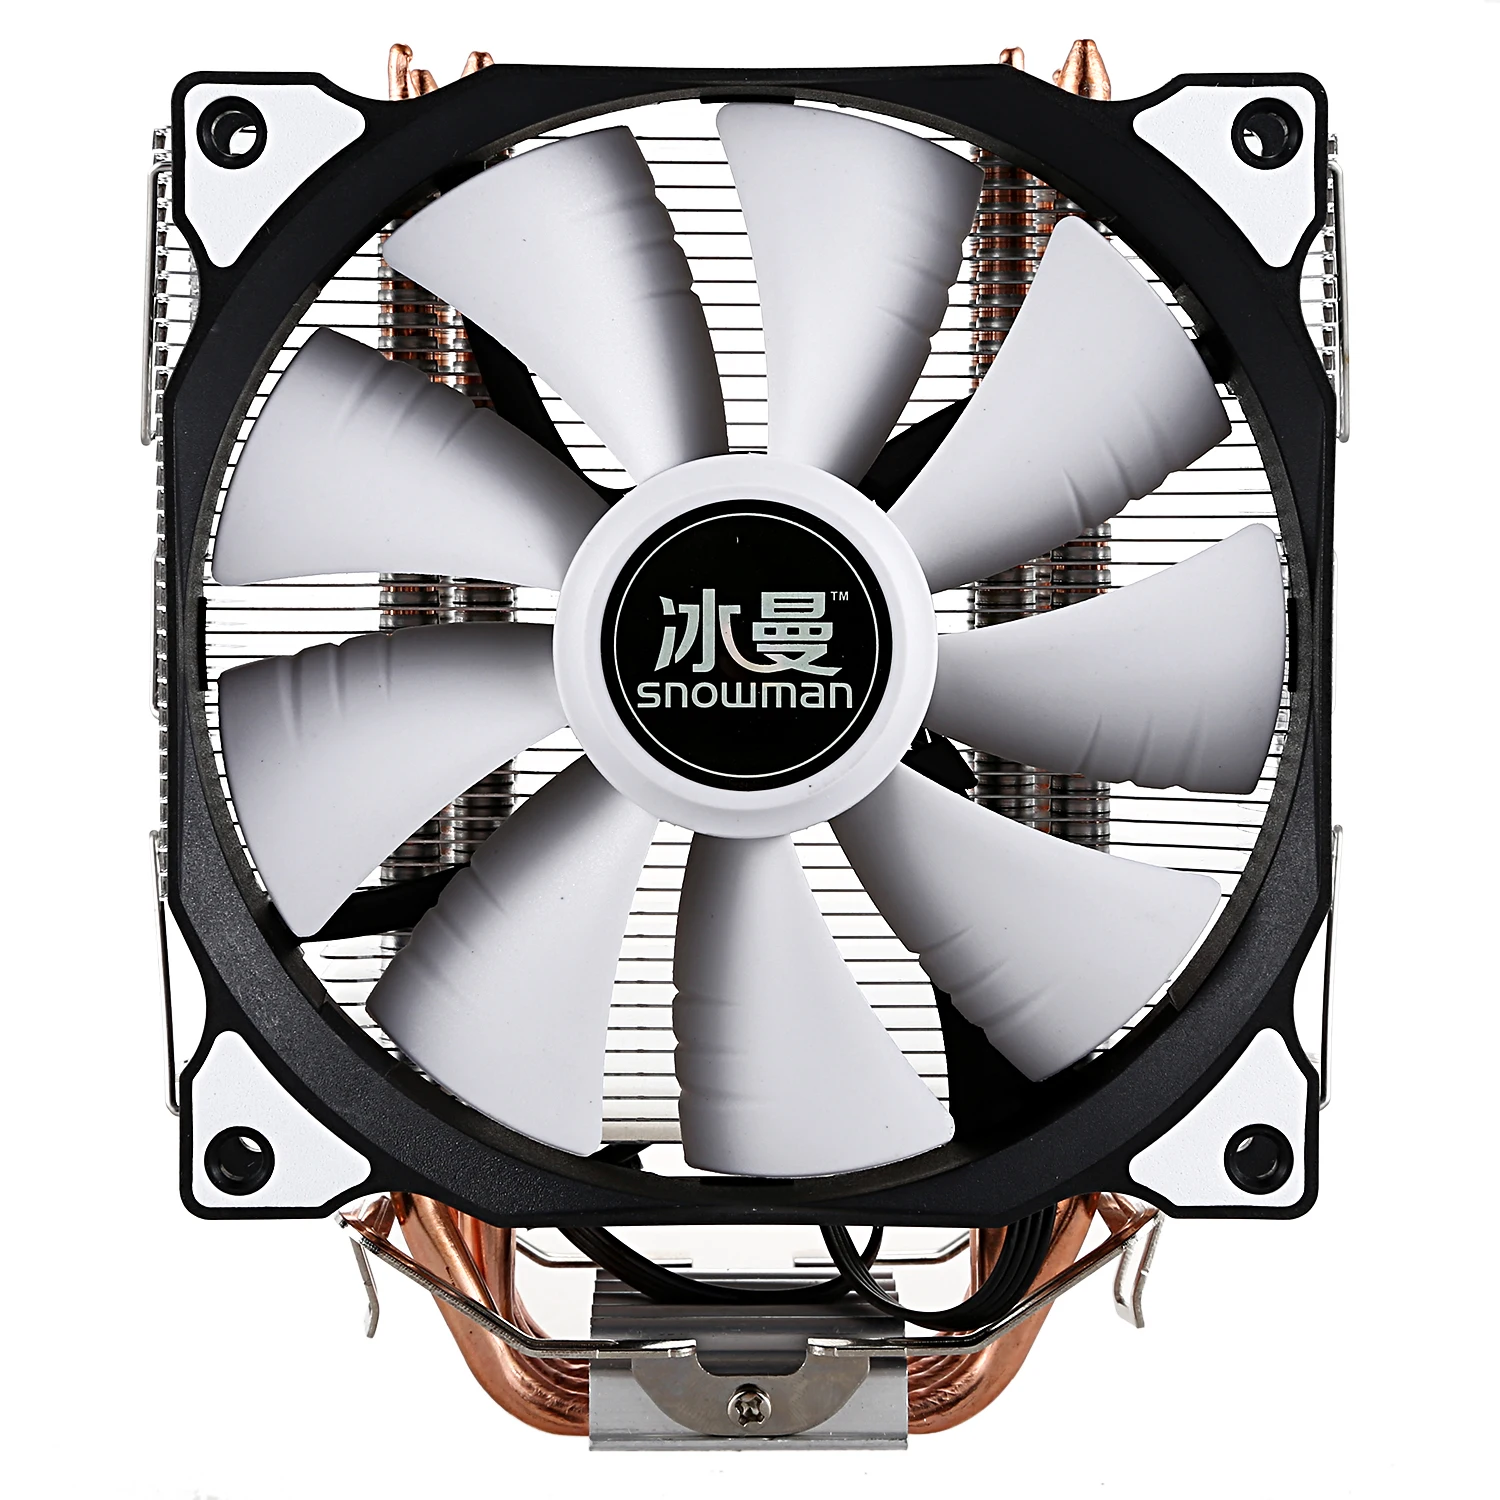 Cooler Master 1X SNOWMAN MT-4 CPU Cooler Master 5 Direct Contact Heatpipes Freeze Tower Co v6 194724075267 